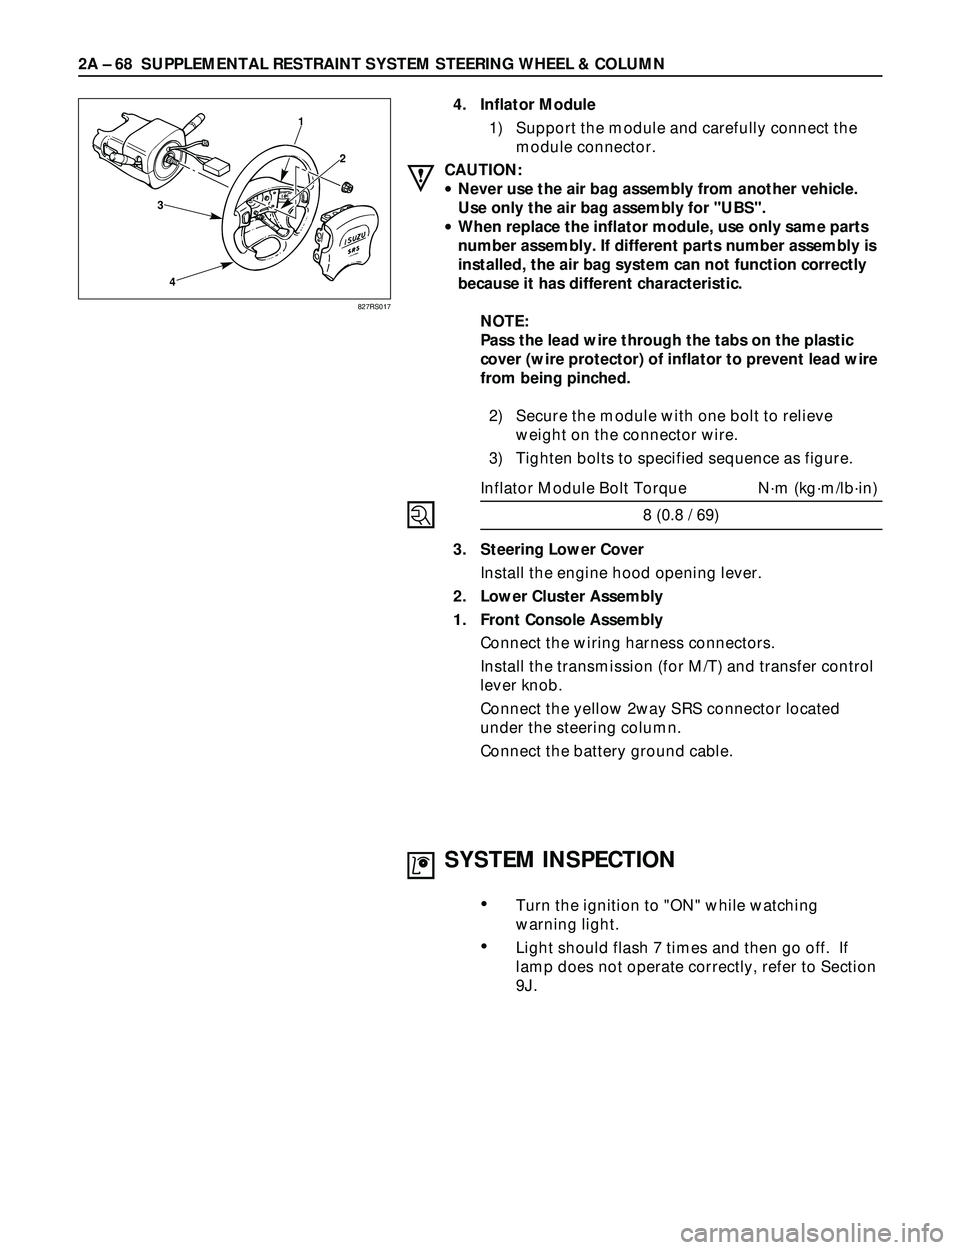 ISUZU TROOPER 1998  Service Repair Manual 2A Ð 68 SUPPLEMENTAL RESTRAINT SYSTEM STEERING WHEEL & COLUMN
3
41
2
4. Inflator Module
1) Support the module and carefully connect the
module connector.
CAUTION:
·Never use the air bag assembly fro